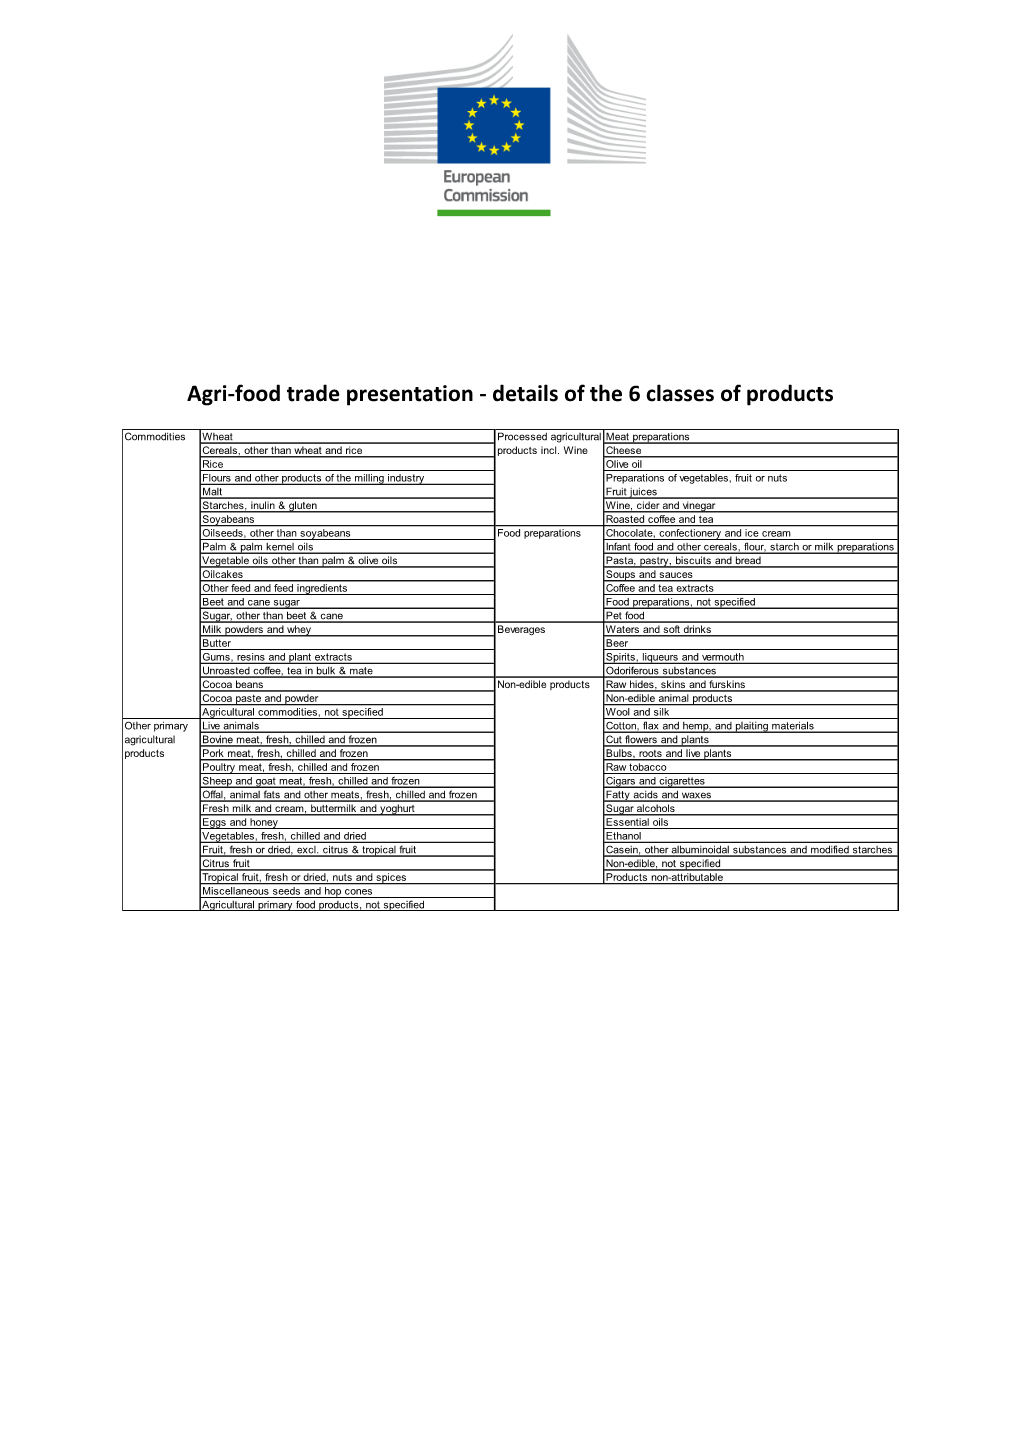 Agri-Food Trade Presentation - Details of the 6 Classes of Products